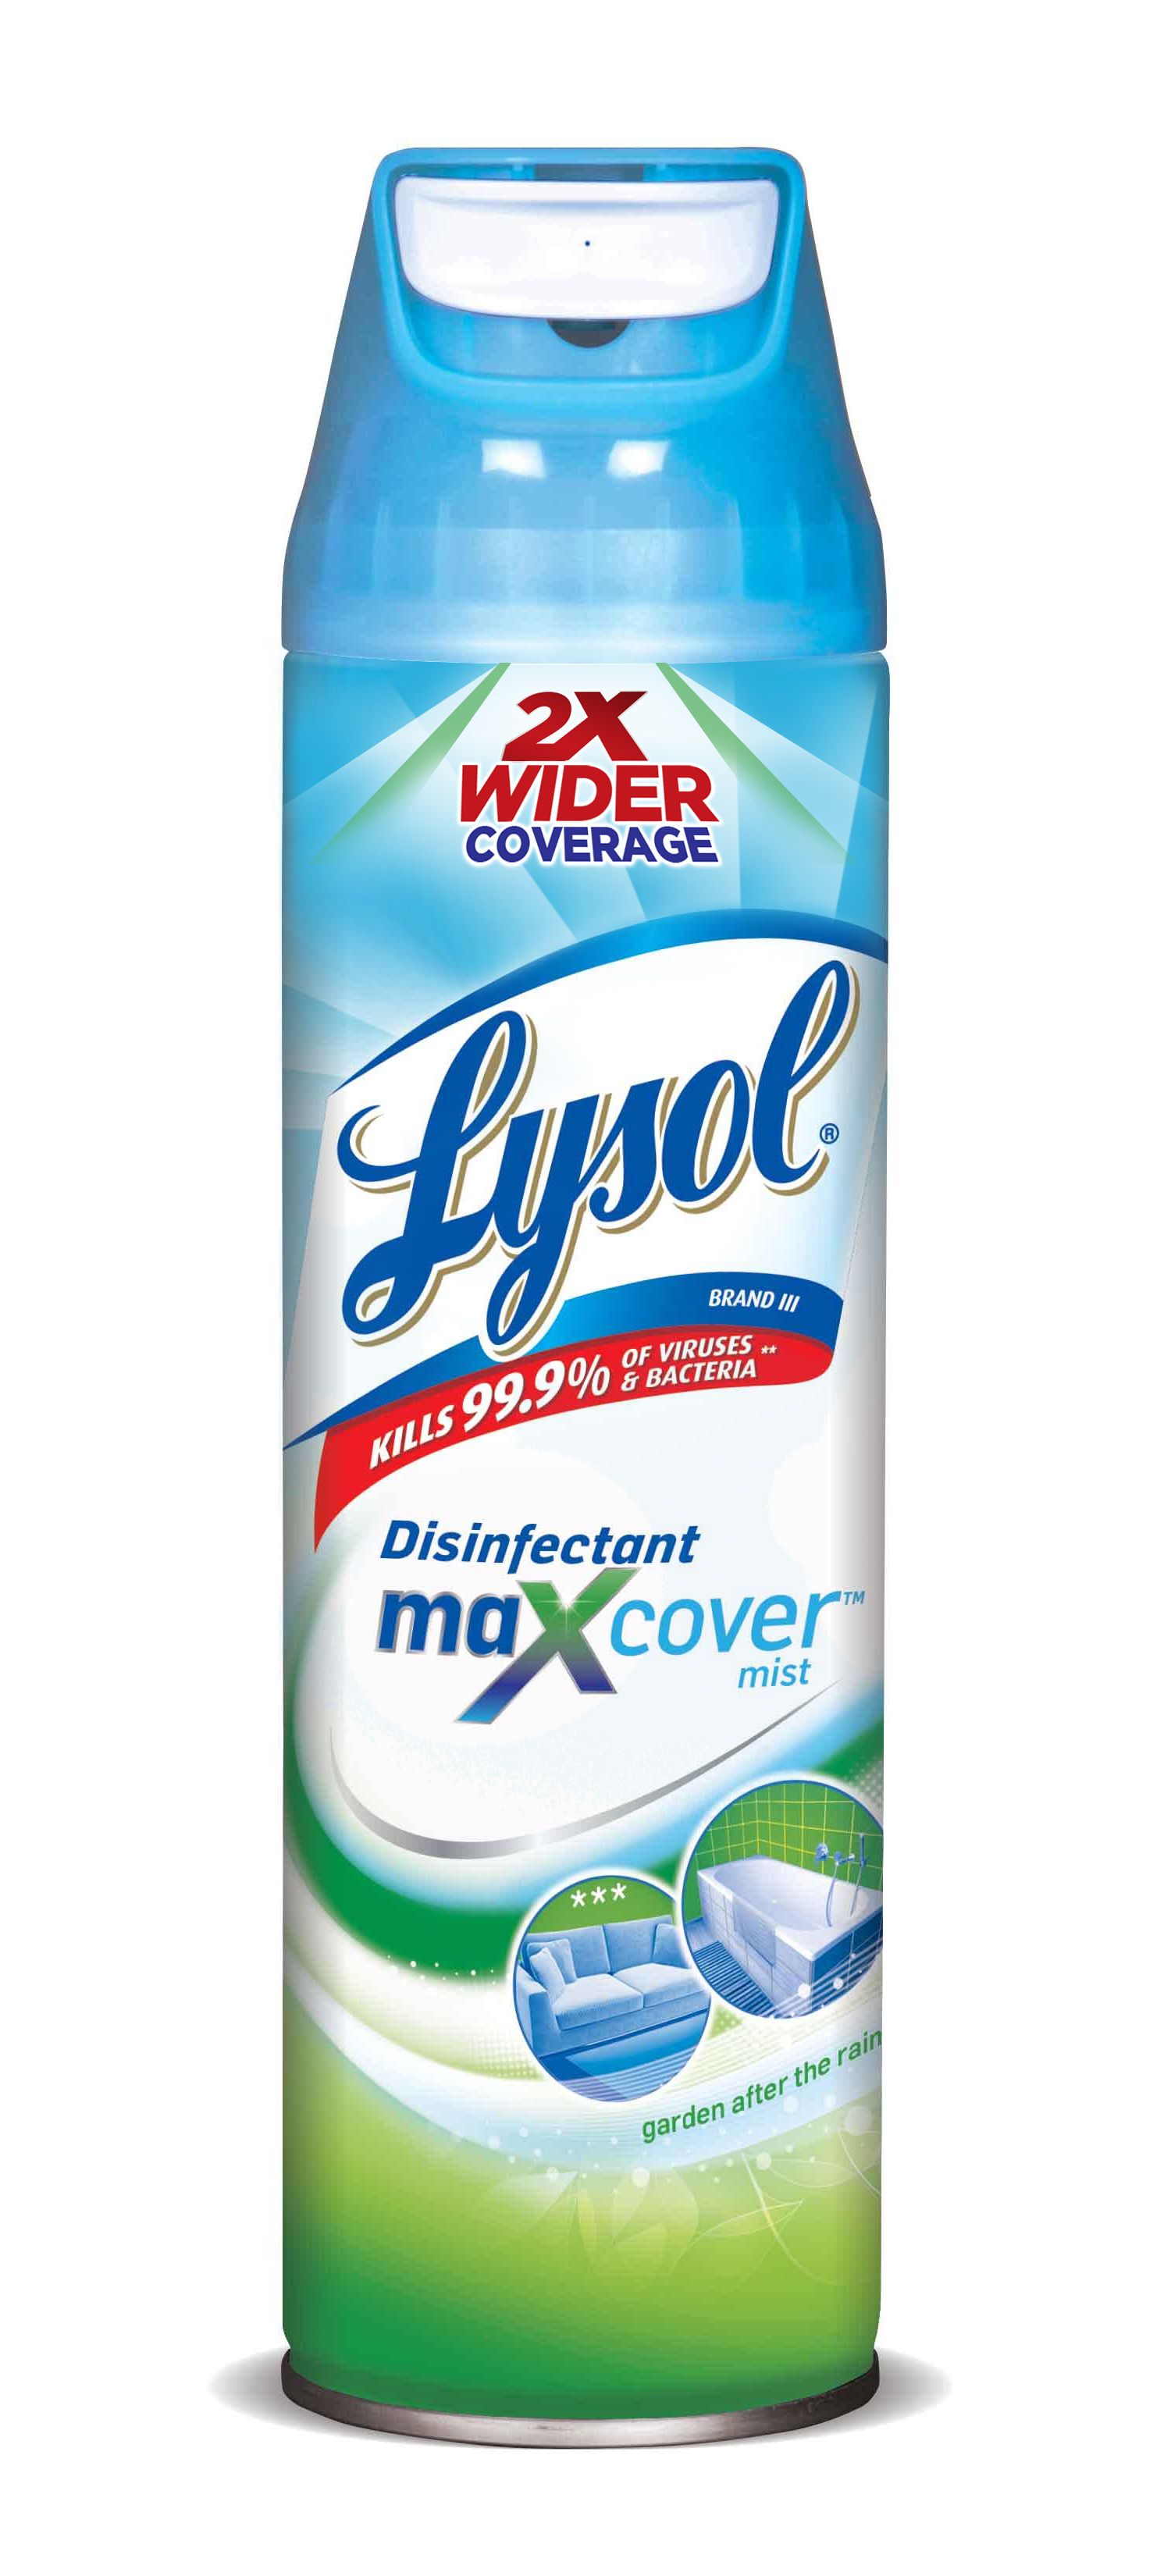 LYSOL Disinfectant Max Cover Mist  Garden after the Rain